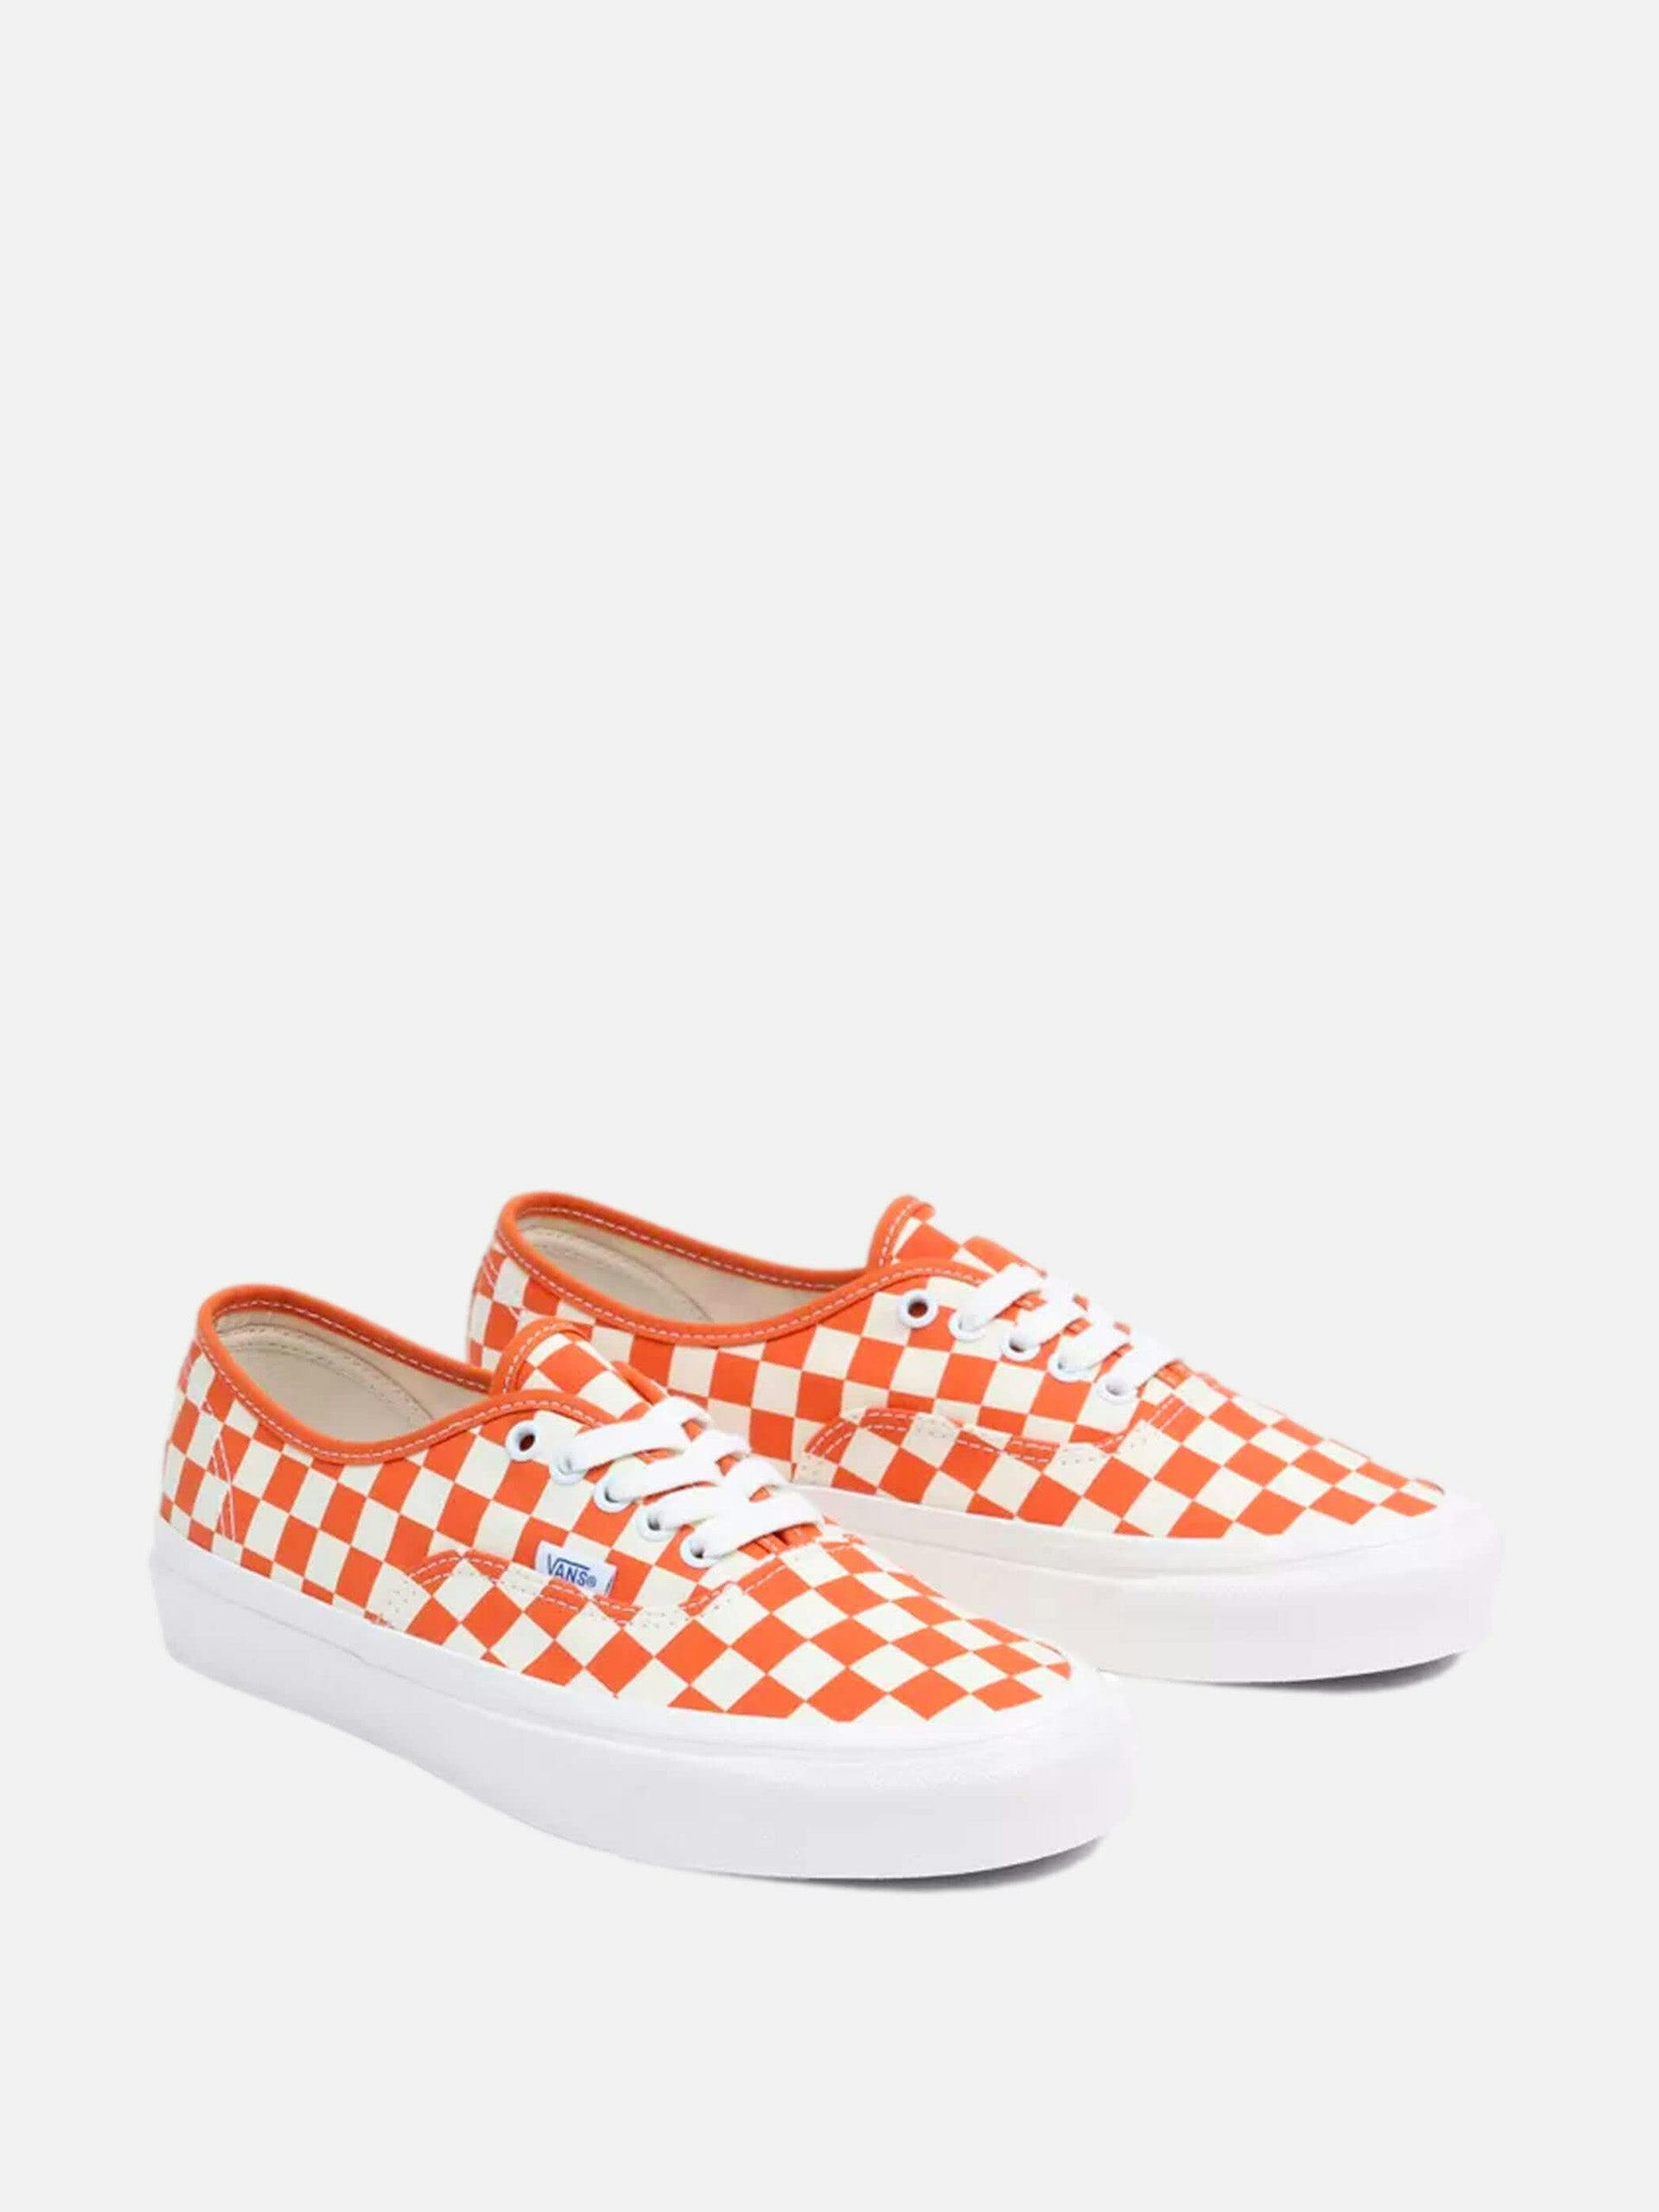 White and orange check Authentic shoes